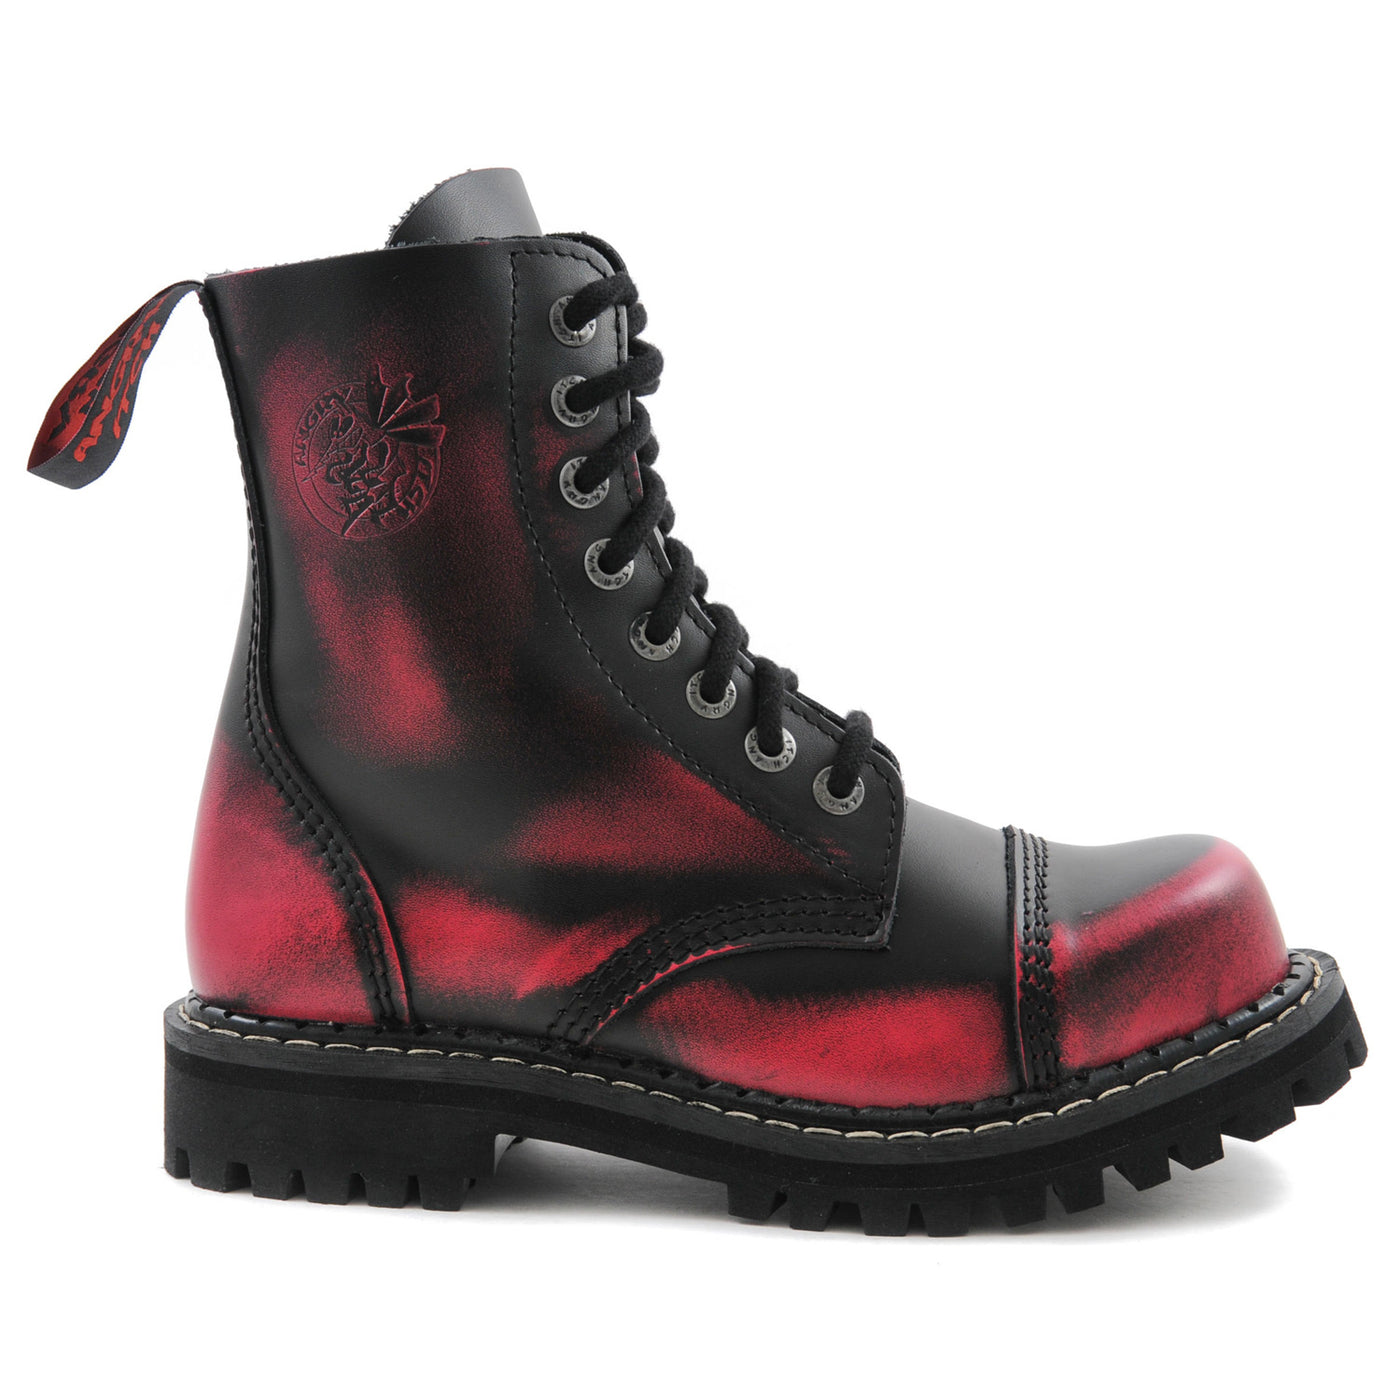 Angry Itch 8 Eyelet Boots with Steel Toe Cap Pink Rub Off Leather